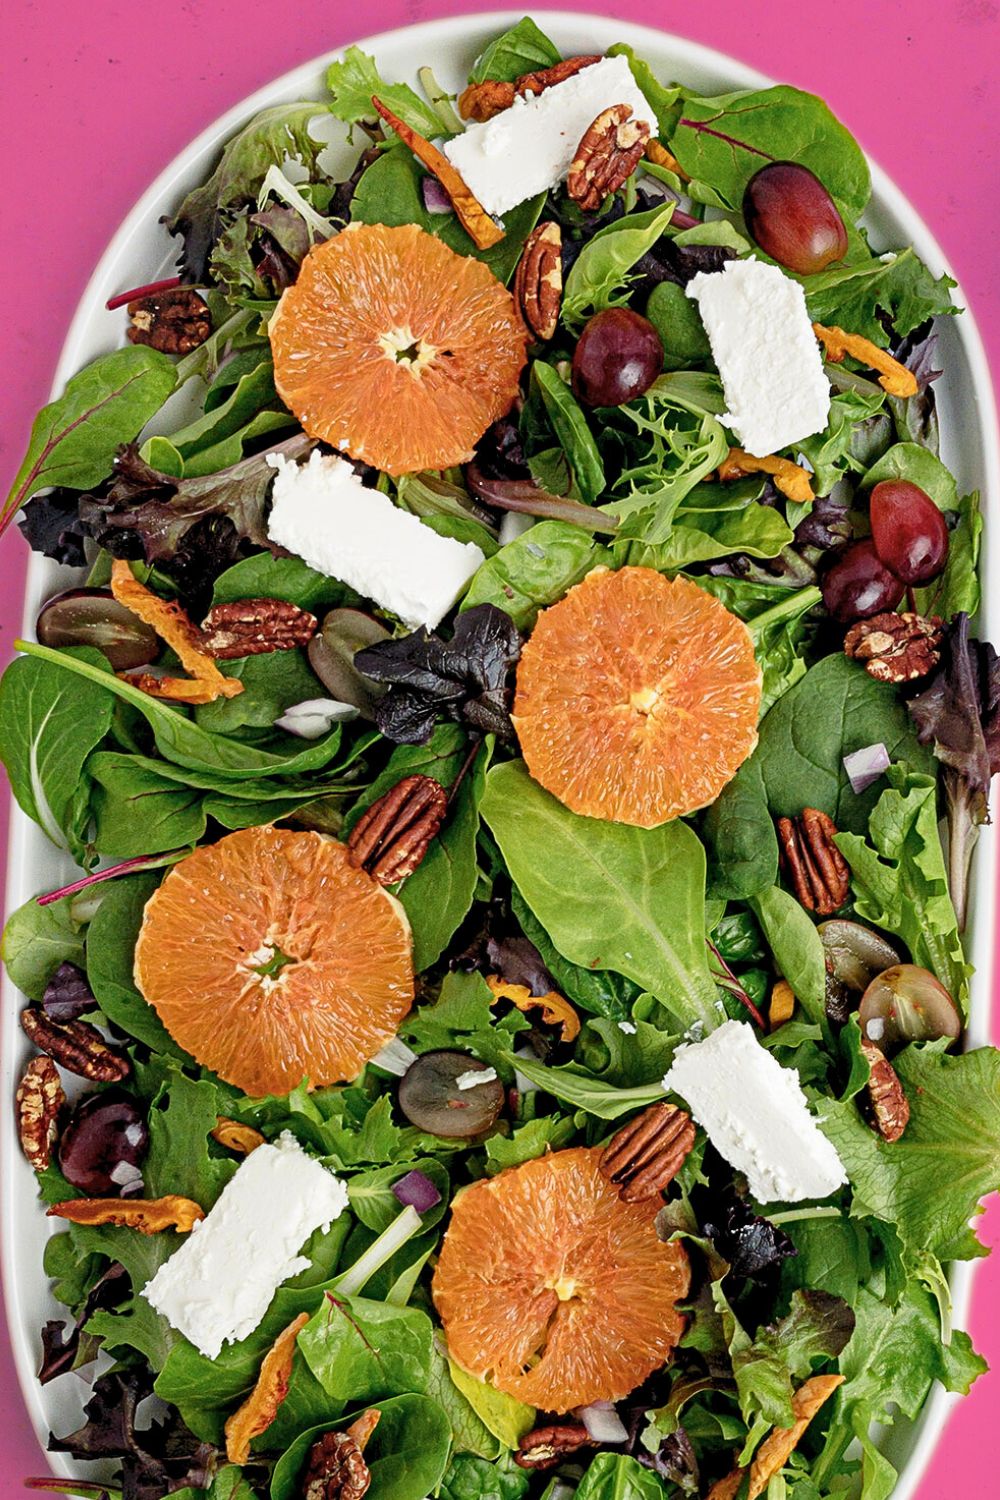 Fruit, Nut and Feta Salad, with a top-down view of the salad against a bright pink background